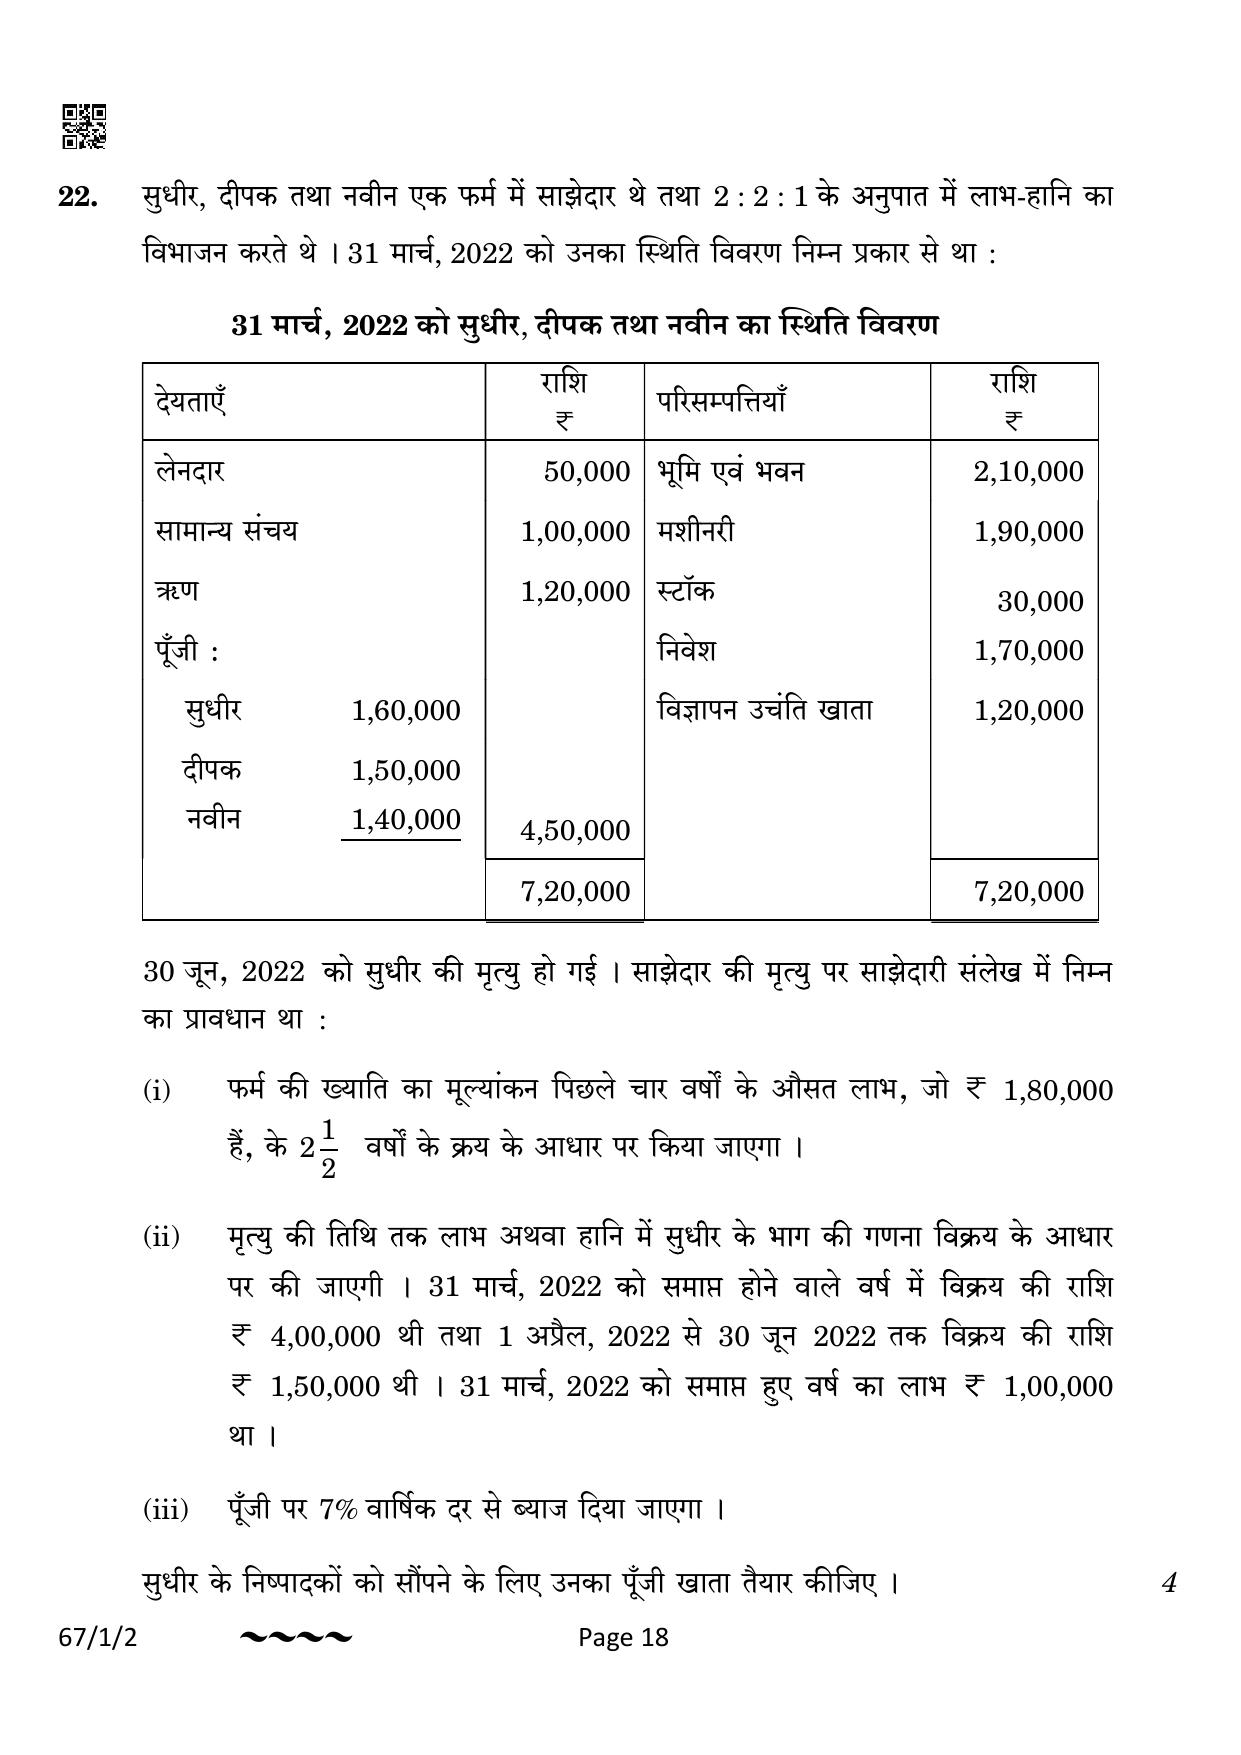 CBSE Class 12 67-1-2 Accountancy 2023 Question Paper - Page 18